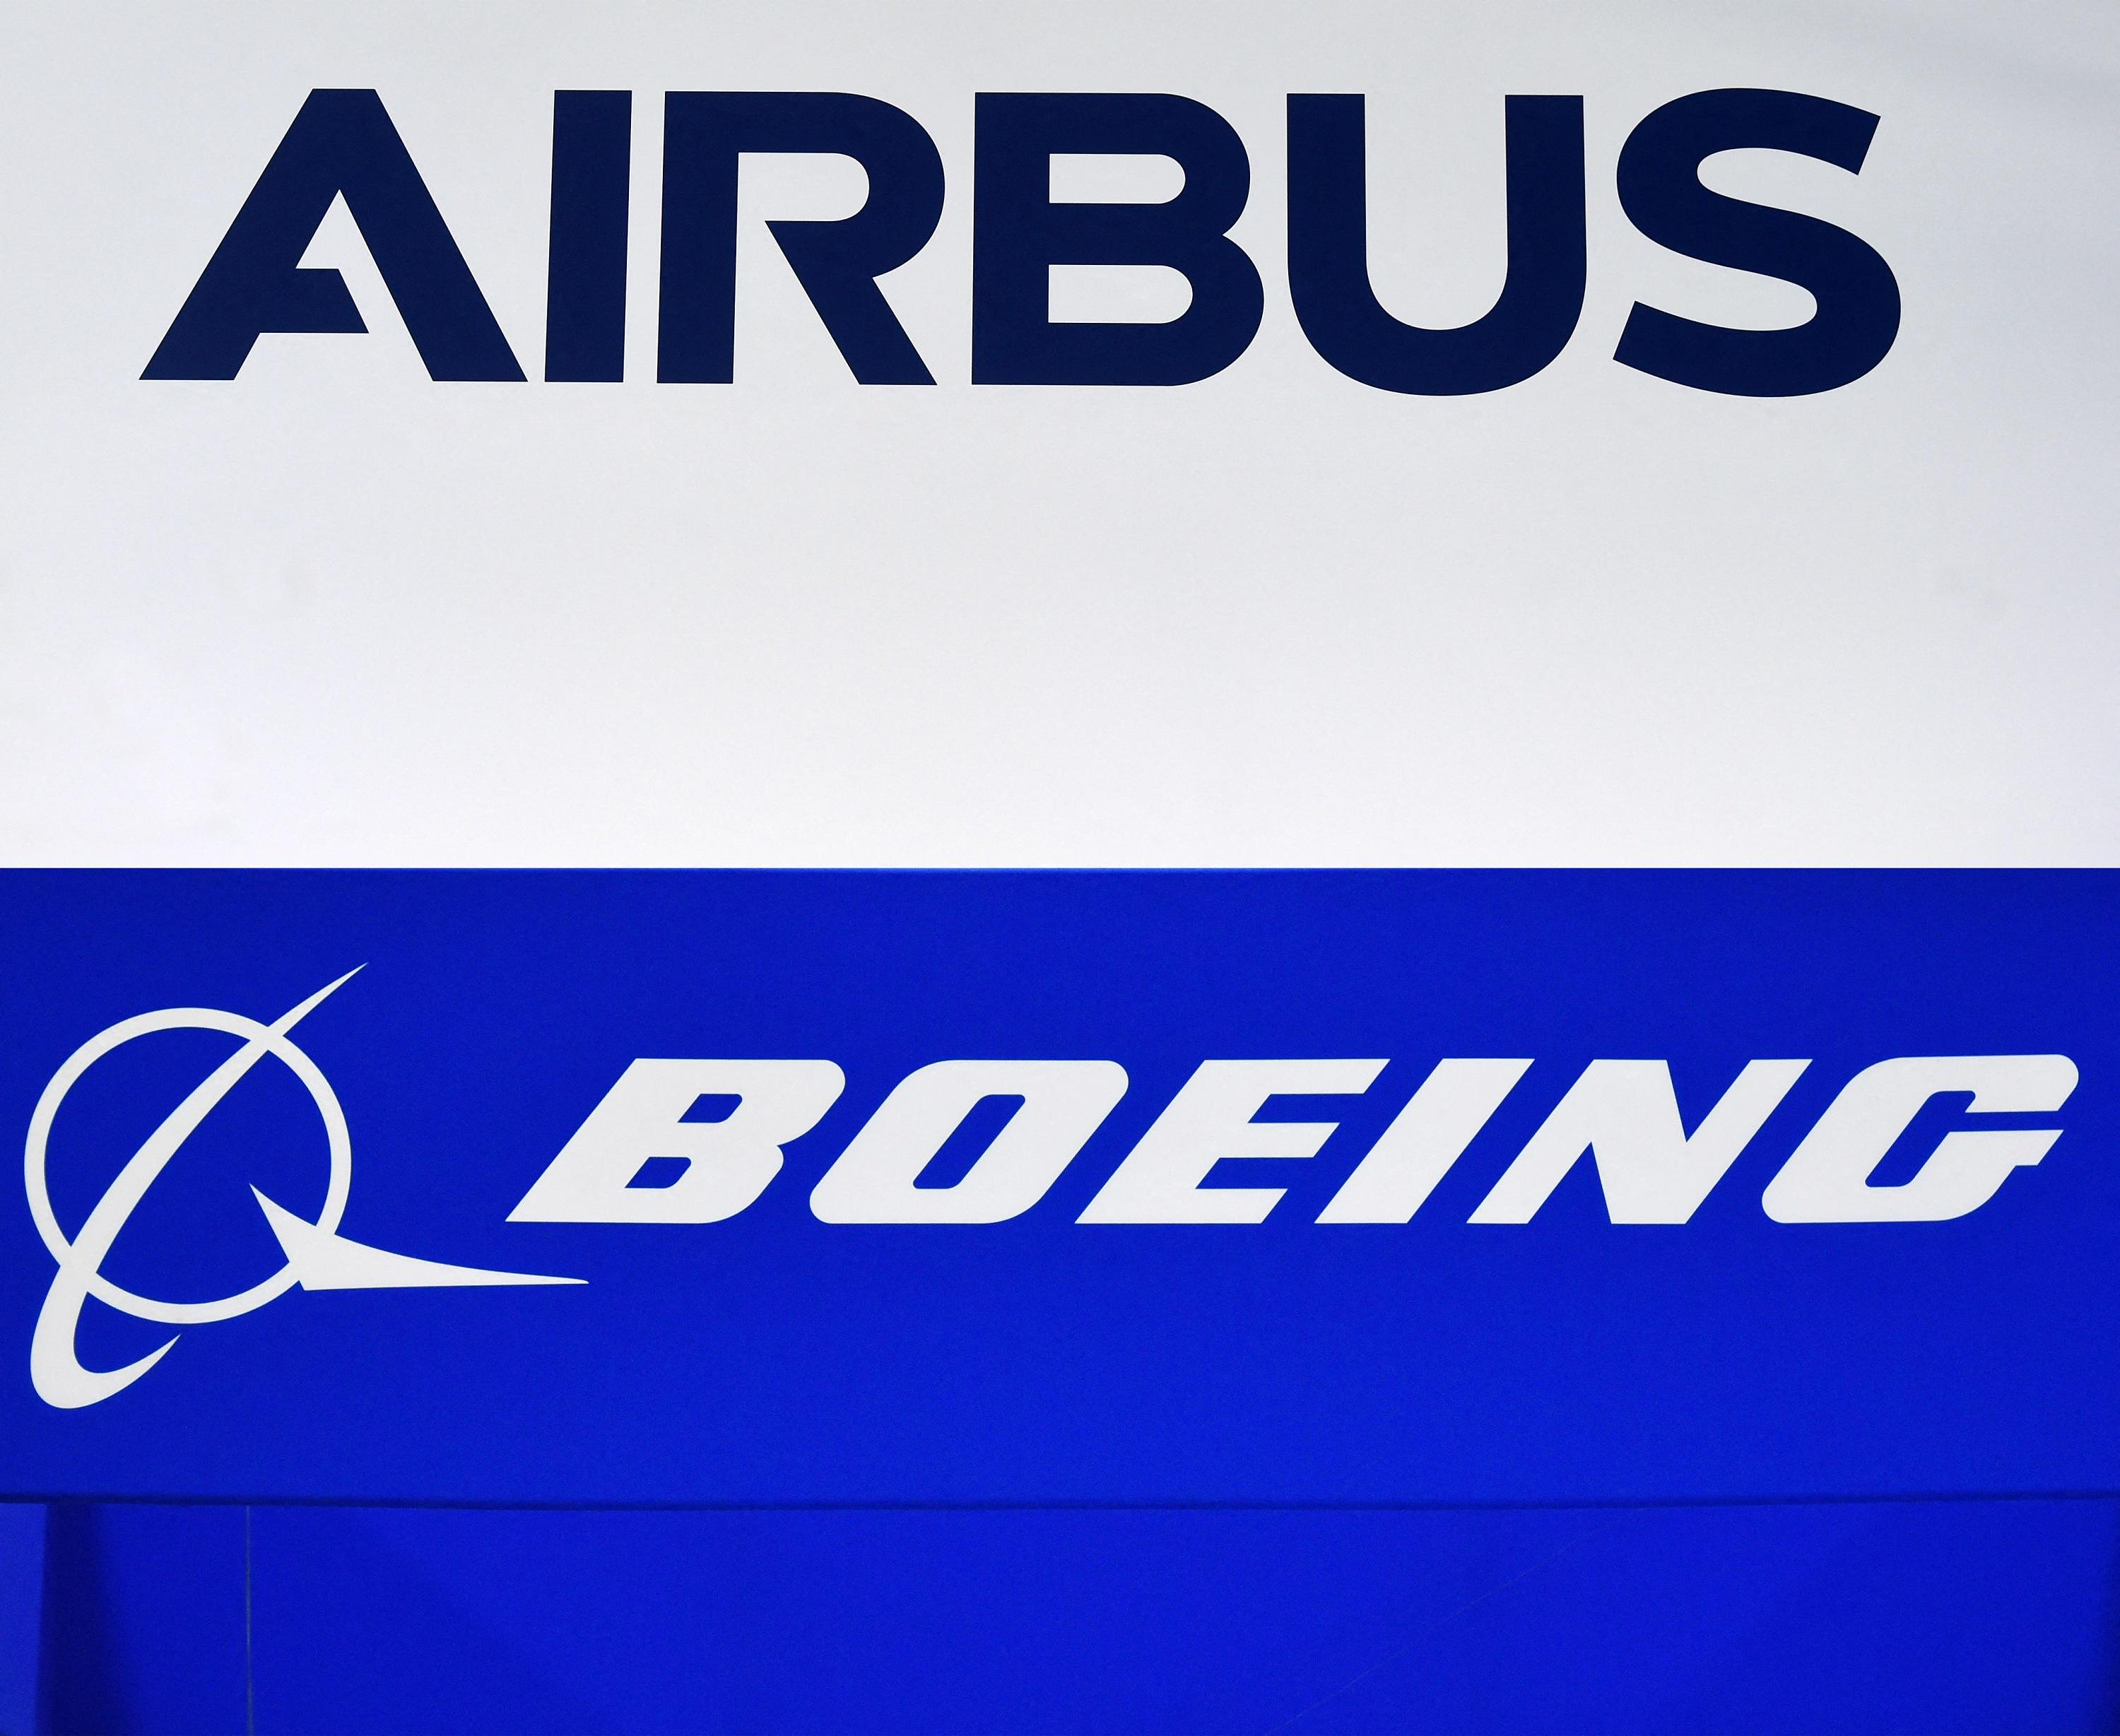 American Airlines places new orders with Airbus, Embraer and Boeing, including 85 737 MAX planes